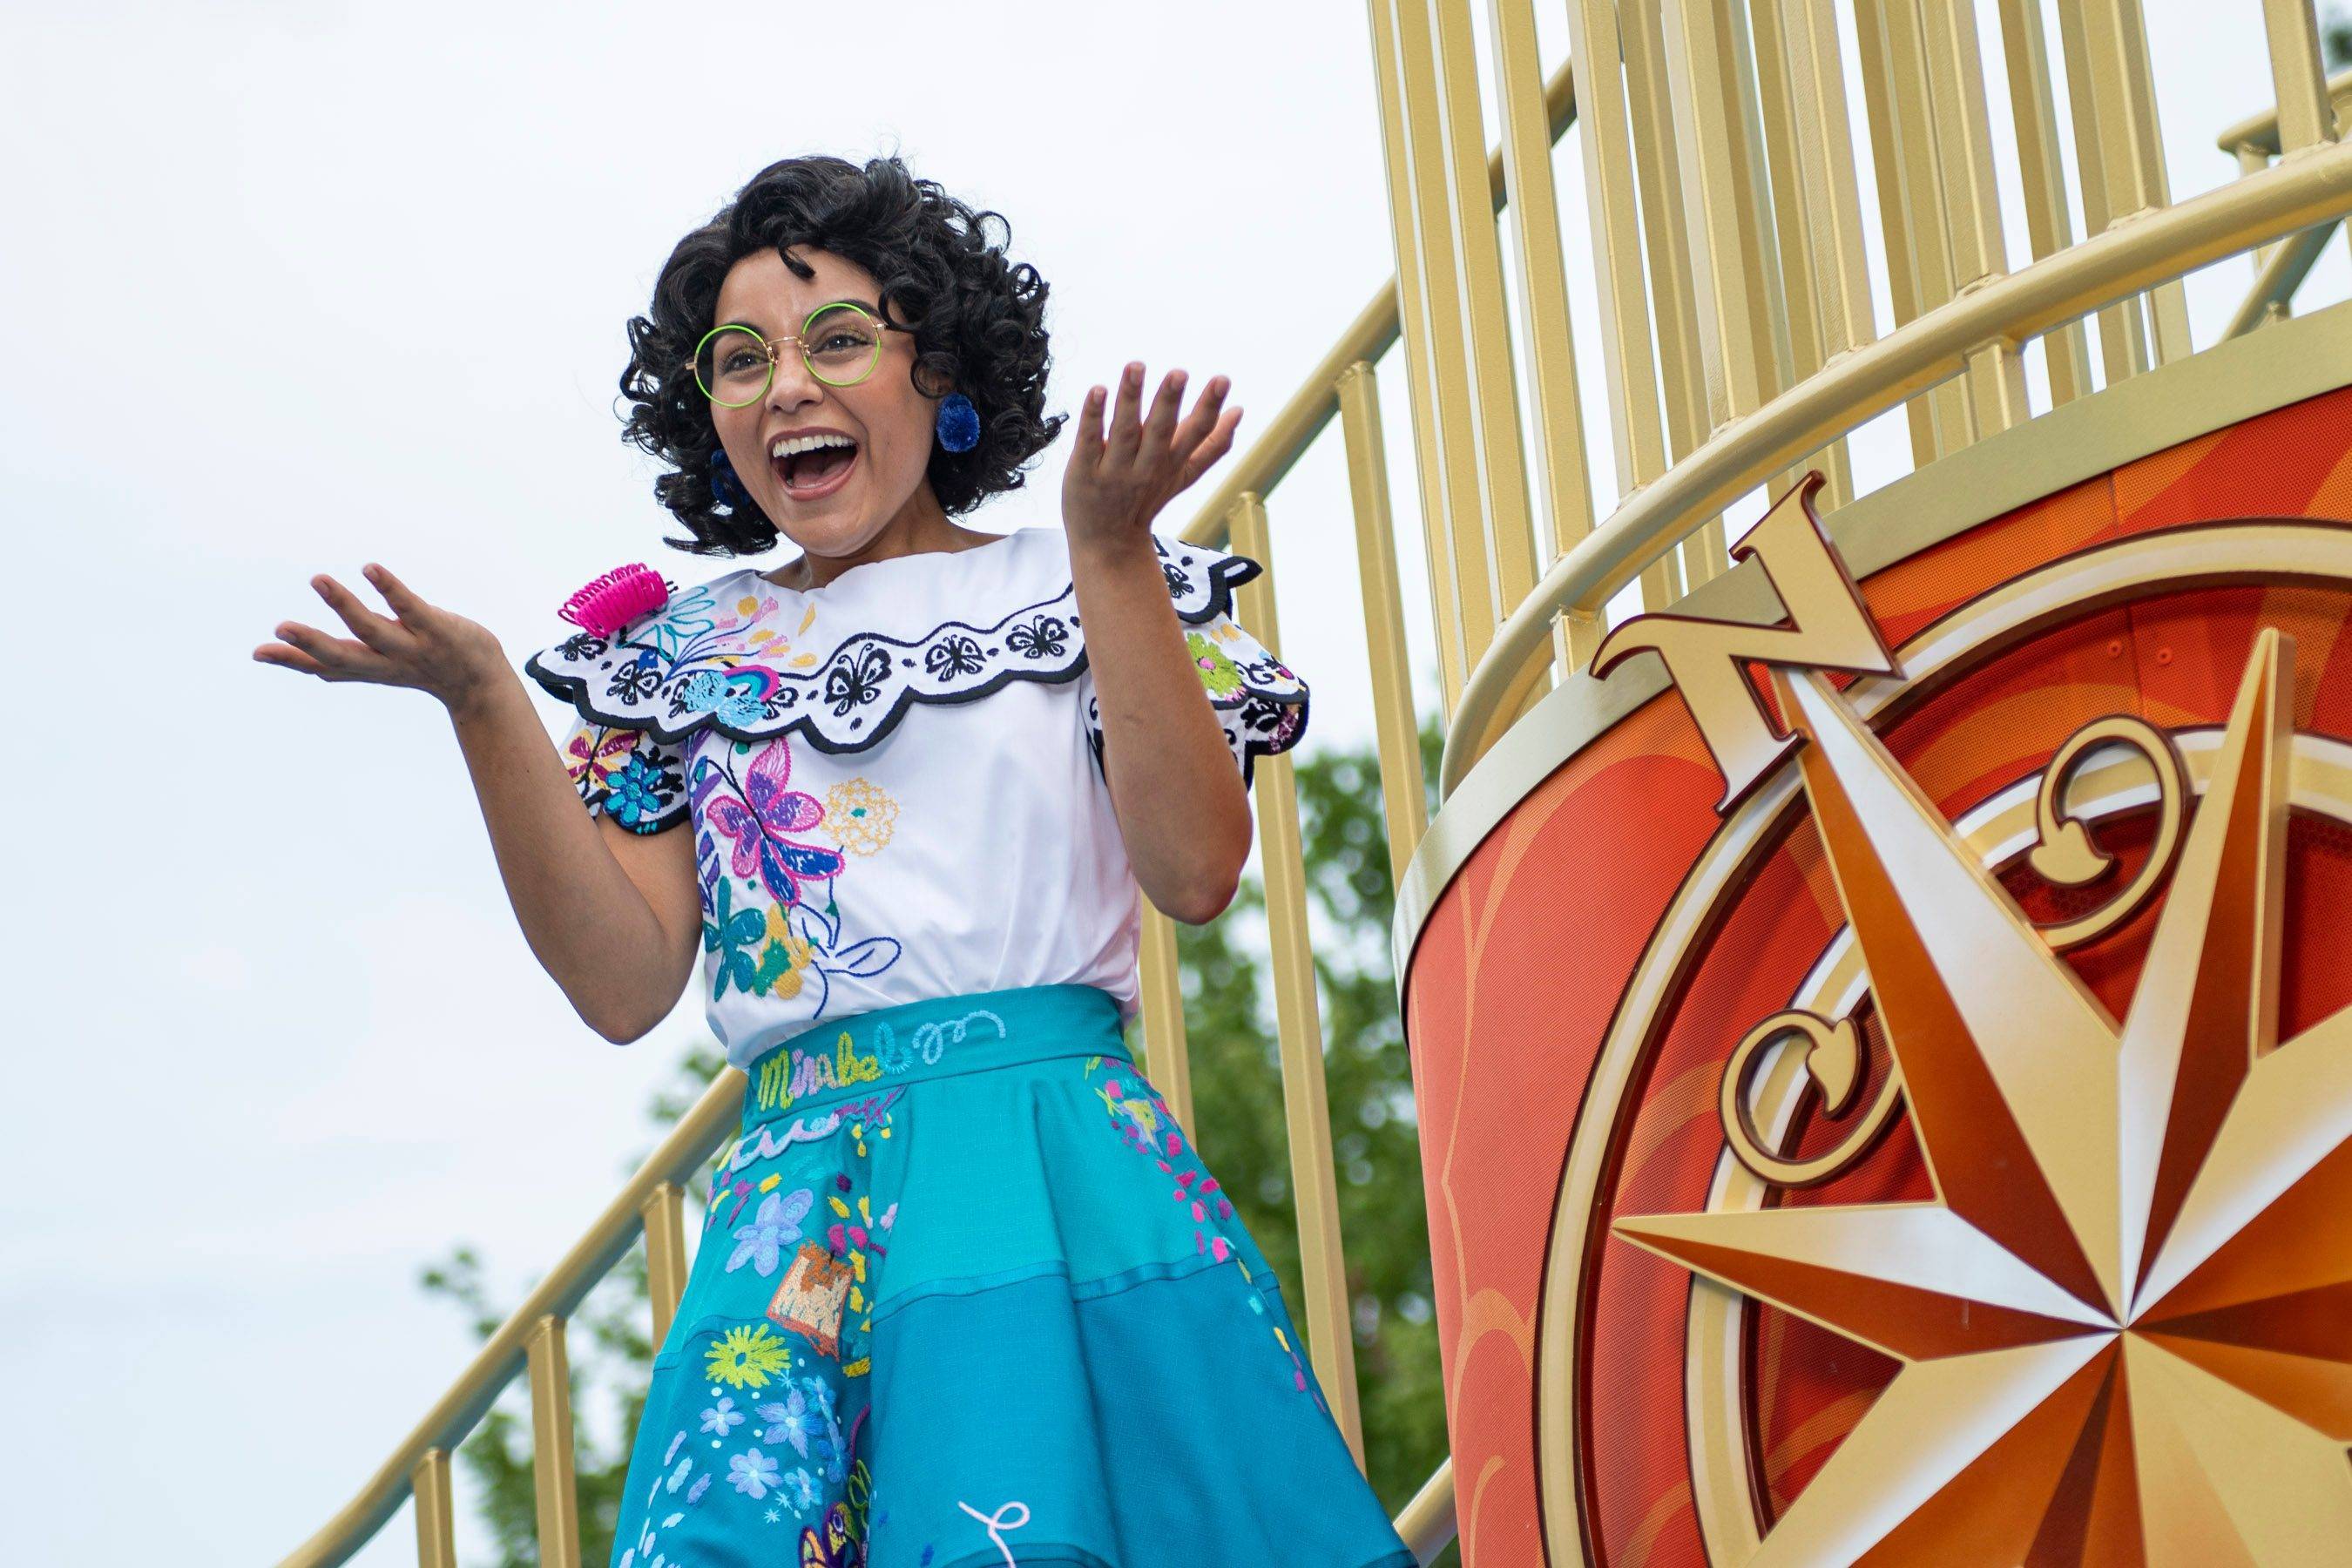 New Encanto meet and greet with Mirabel will open at Magic Kingdom in September